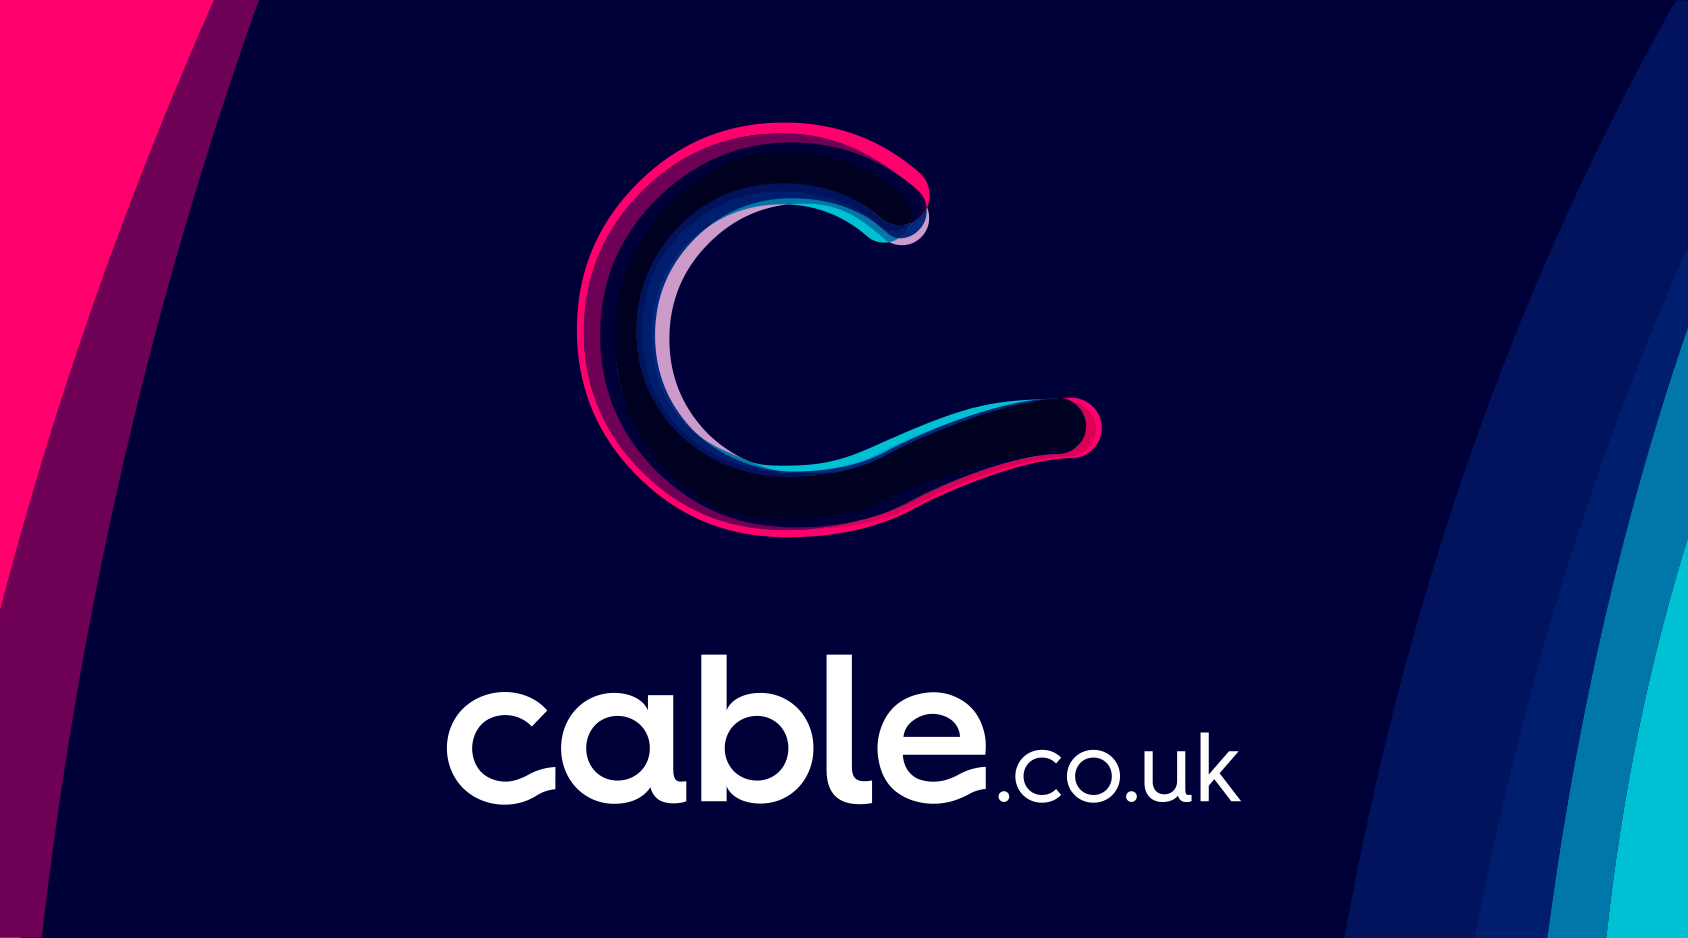 www.cable.co.uk